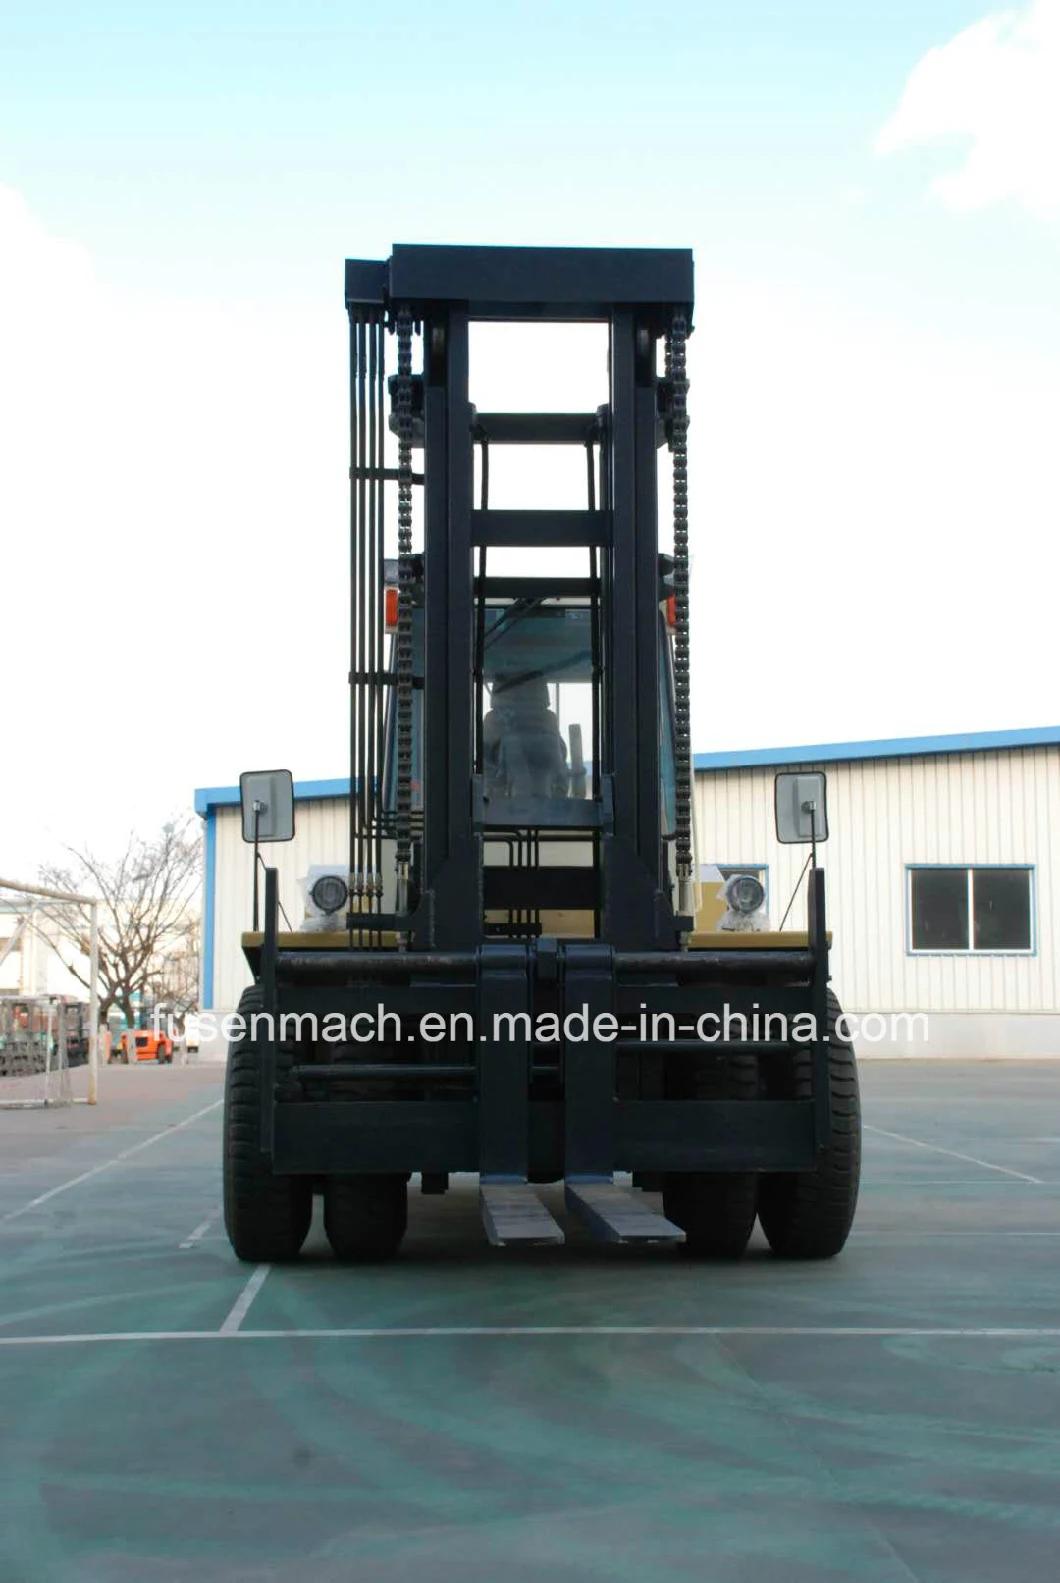 Good Price for Dalian Forklift Truck Fd160 with Cummins Engine